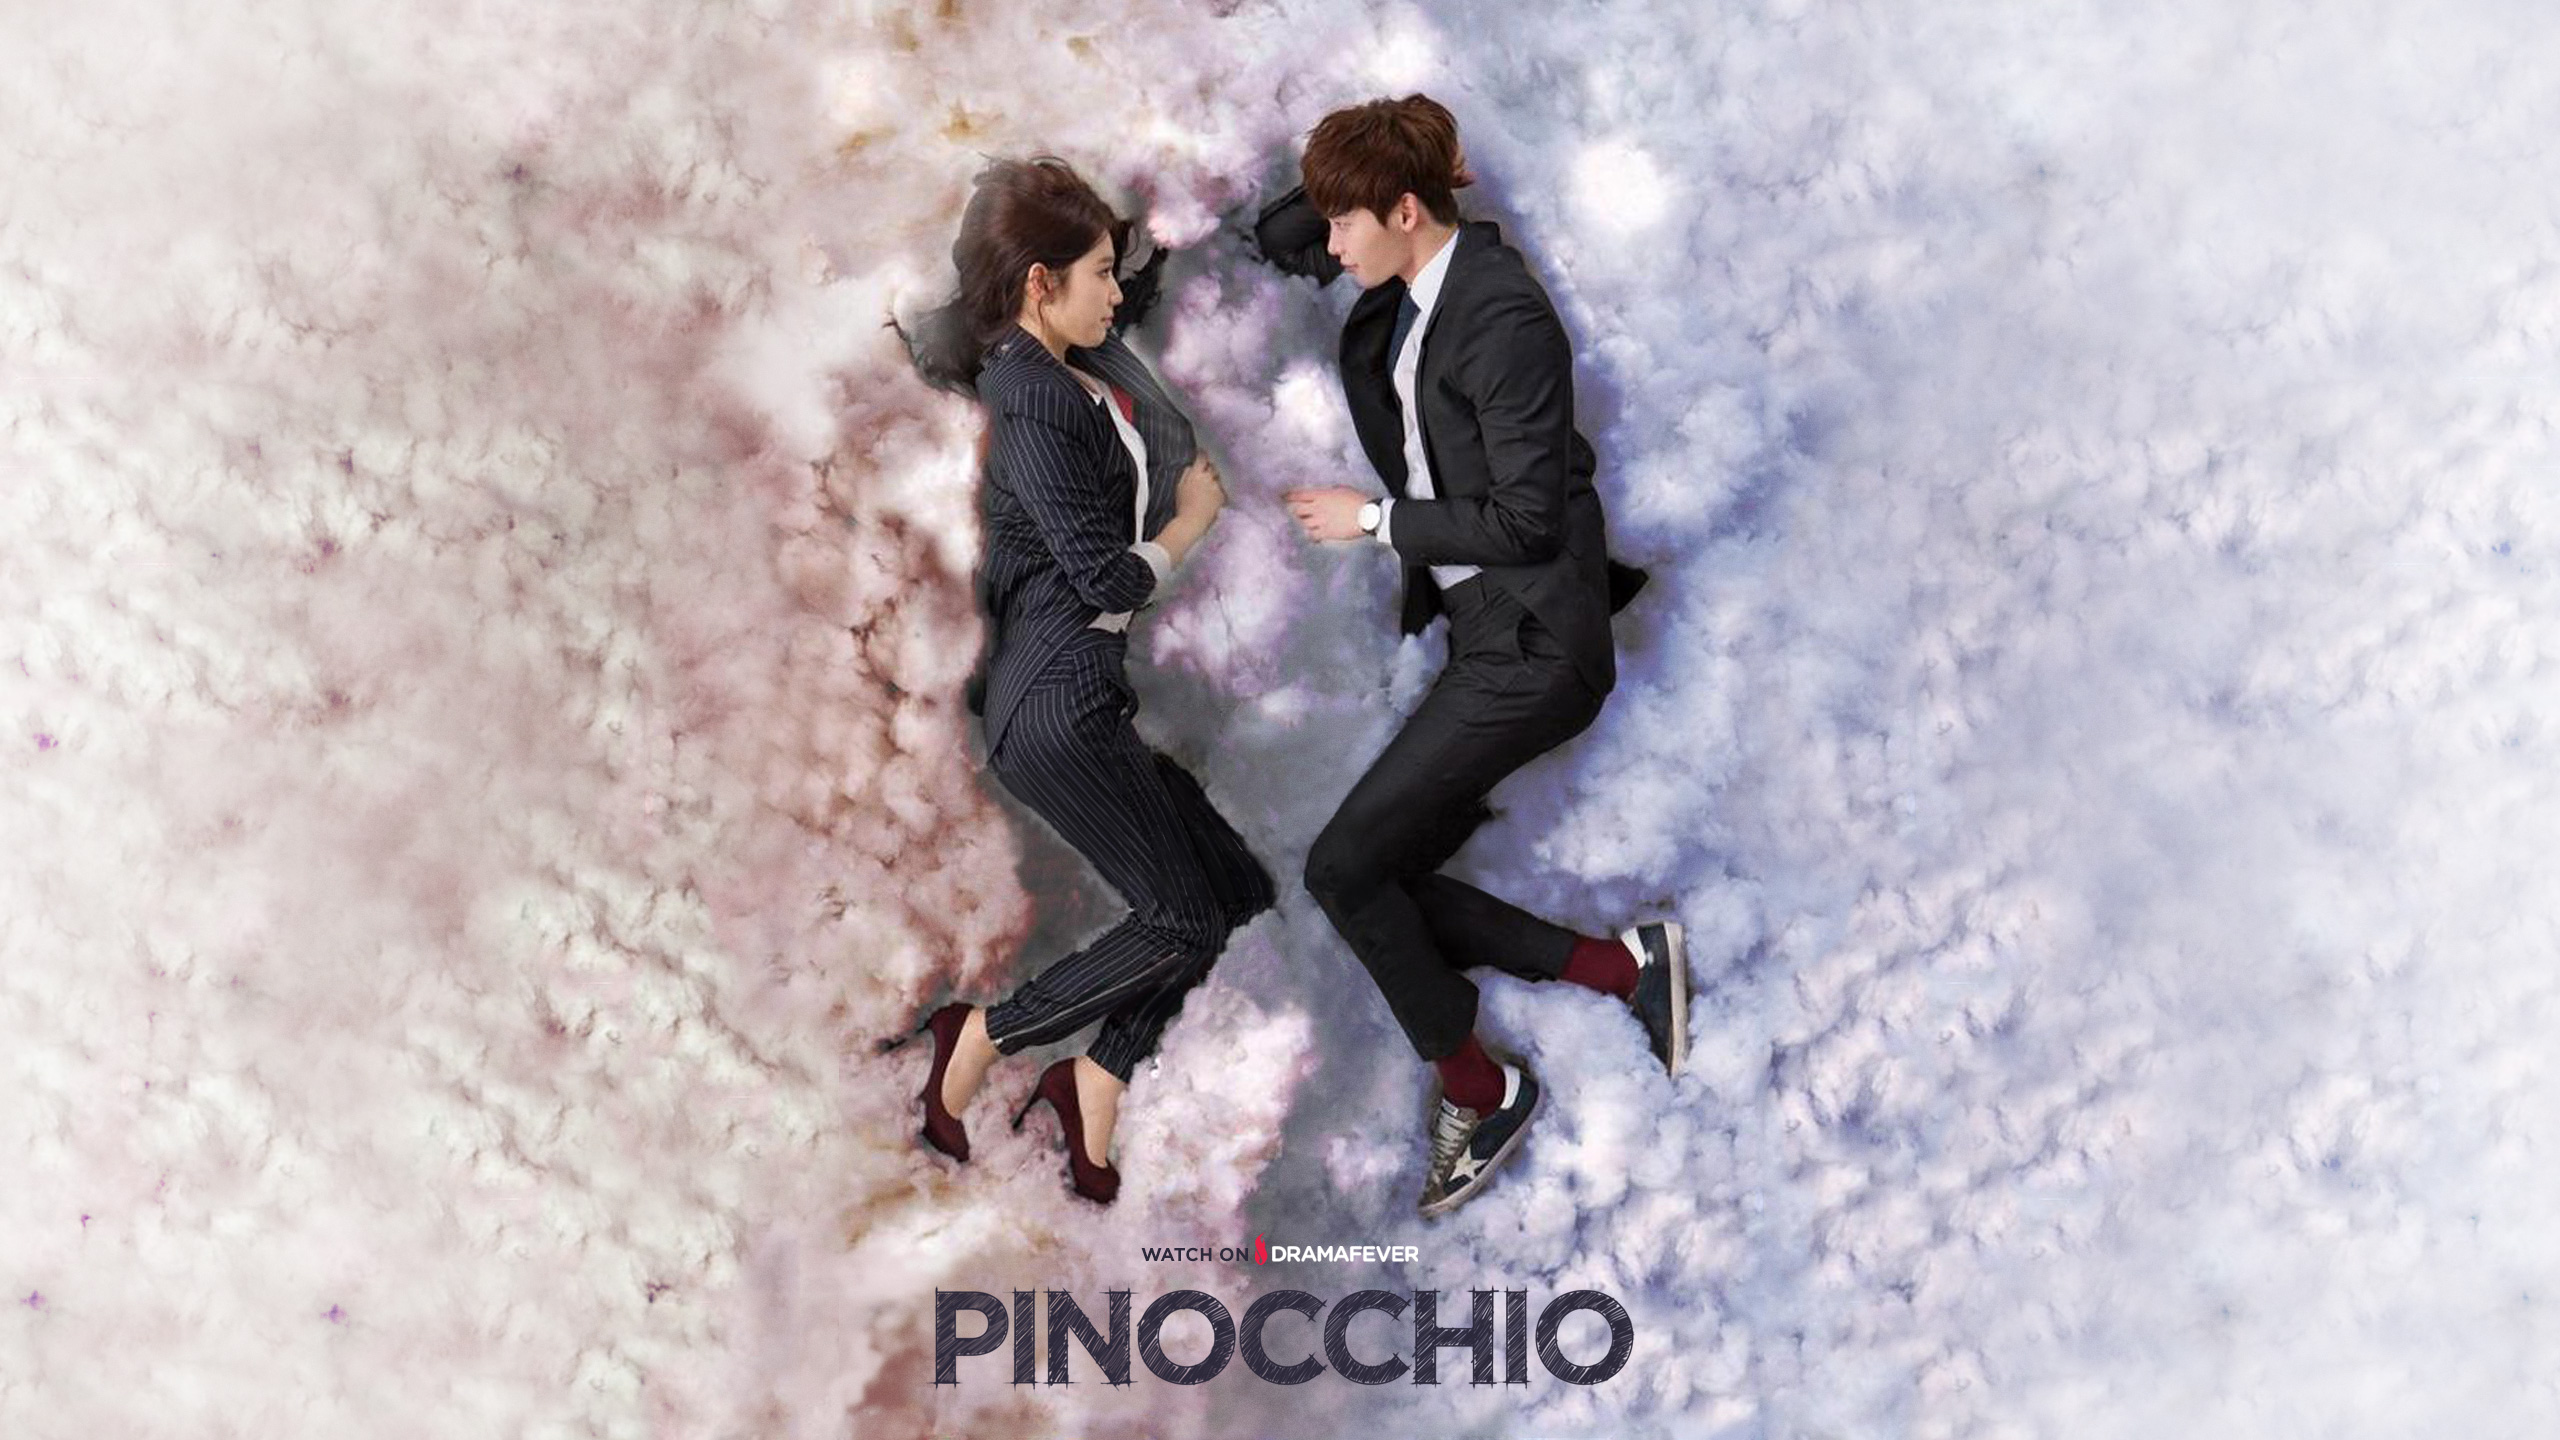 Pinocchio Wallpaper For Your Desktop iPhone iPad And